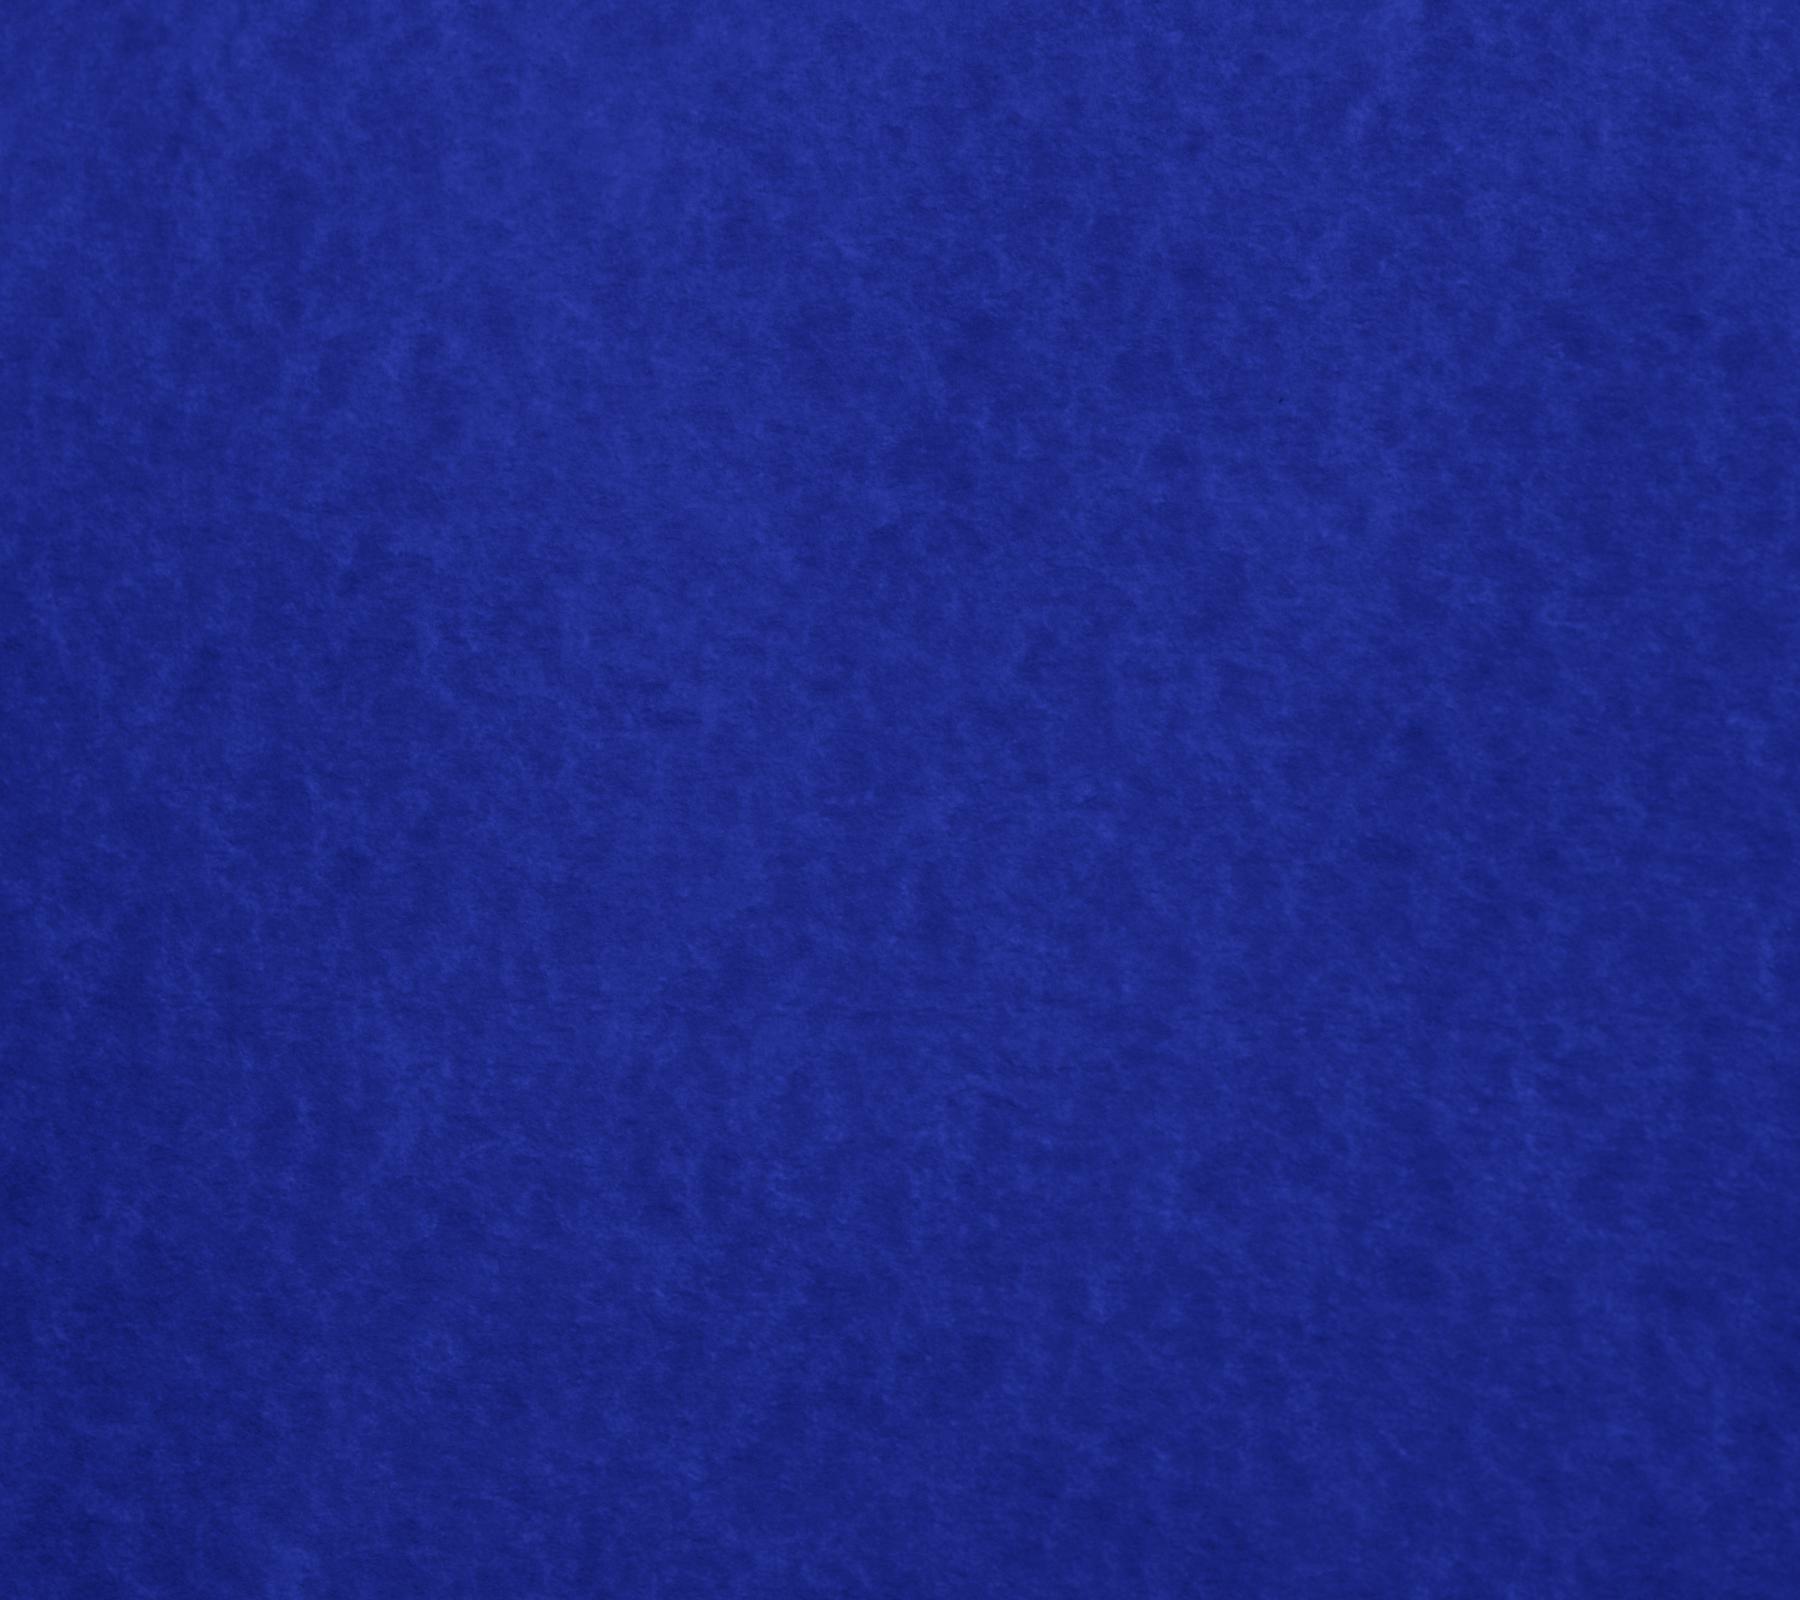 Blue Background Photos and tileable wallpapers for your web page